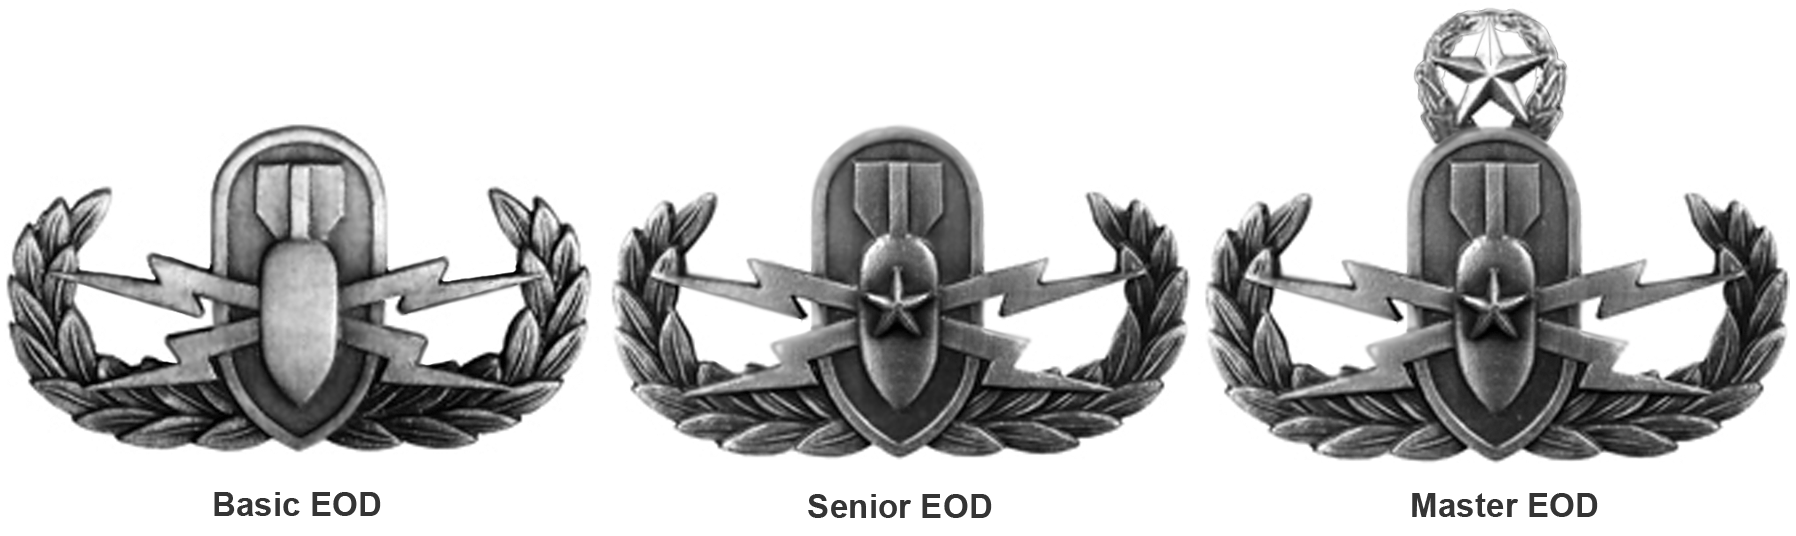 EOD Crab Logo - File:EOD Insignia.png - Wikimedia Commons